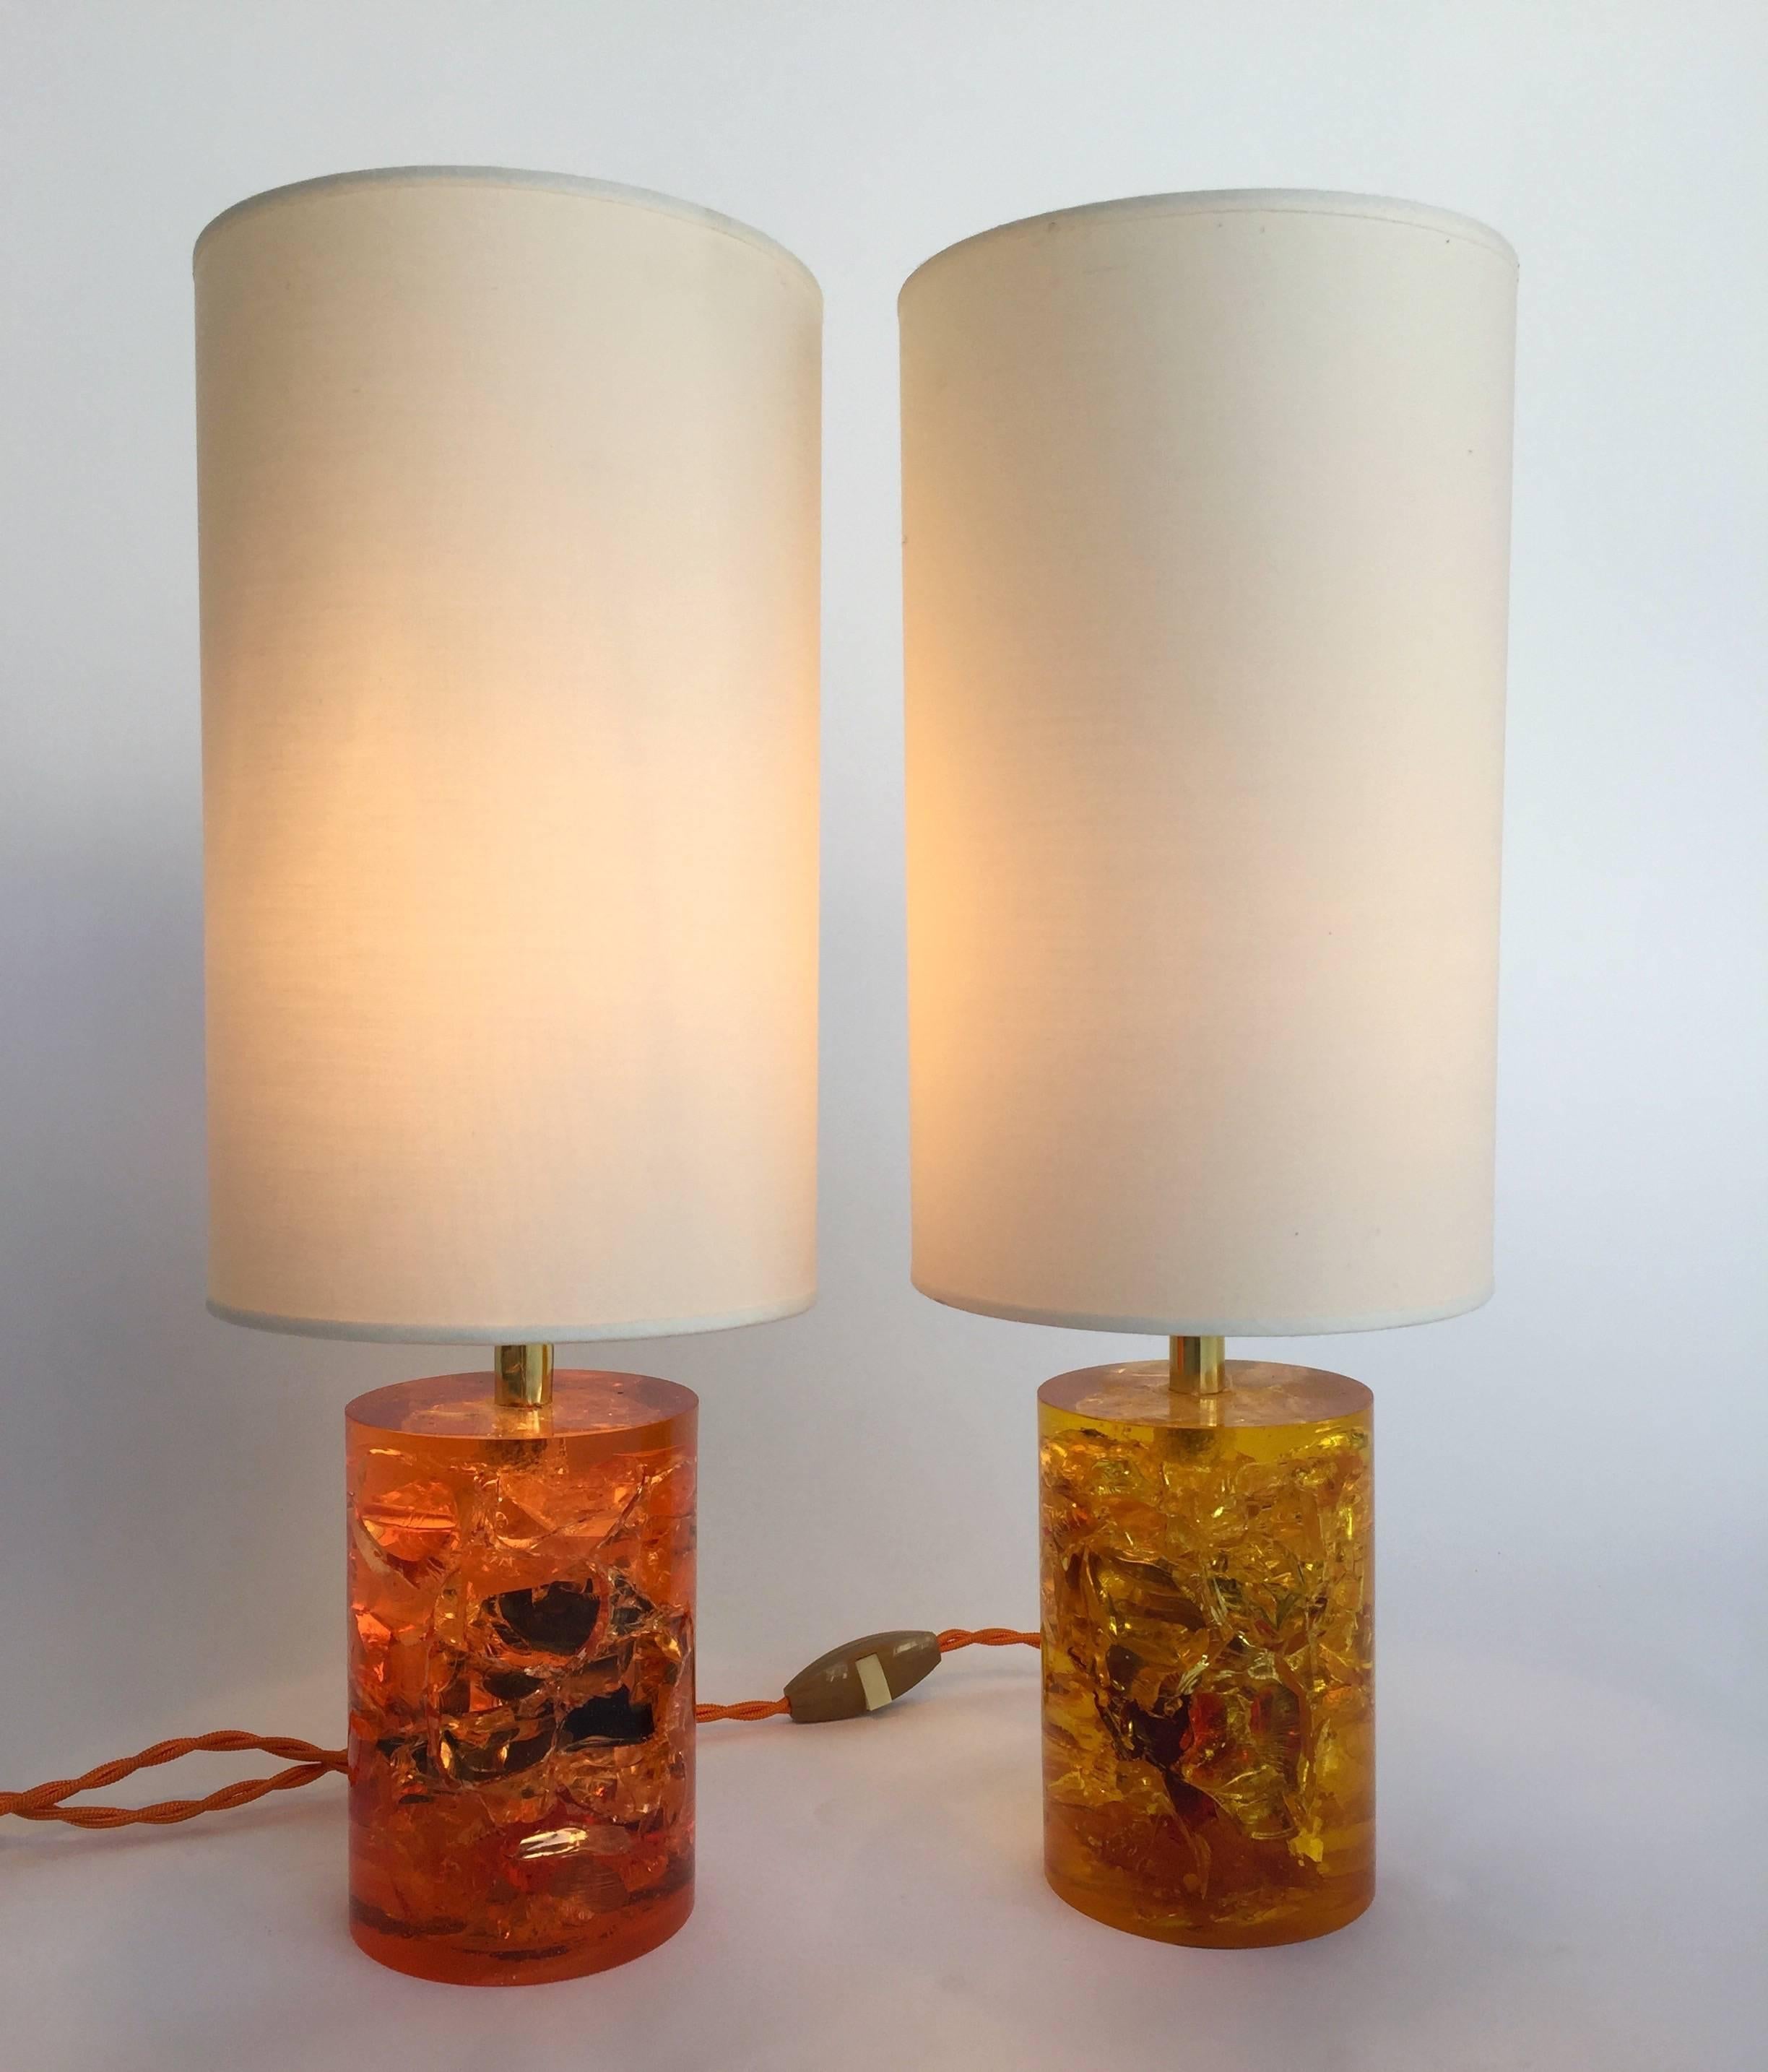 Pair of table or bedside lamps in orange and yellow shades fractal resin. Famous technique as Pierre Giraudon, François Godebski, Marie Claude Fouquières. Perfect custom-made lampshade. Measures: Height top of resin 14 centimeters.